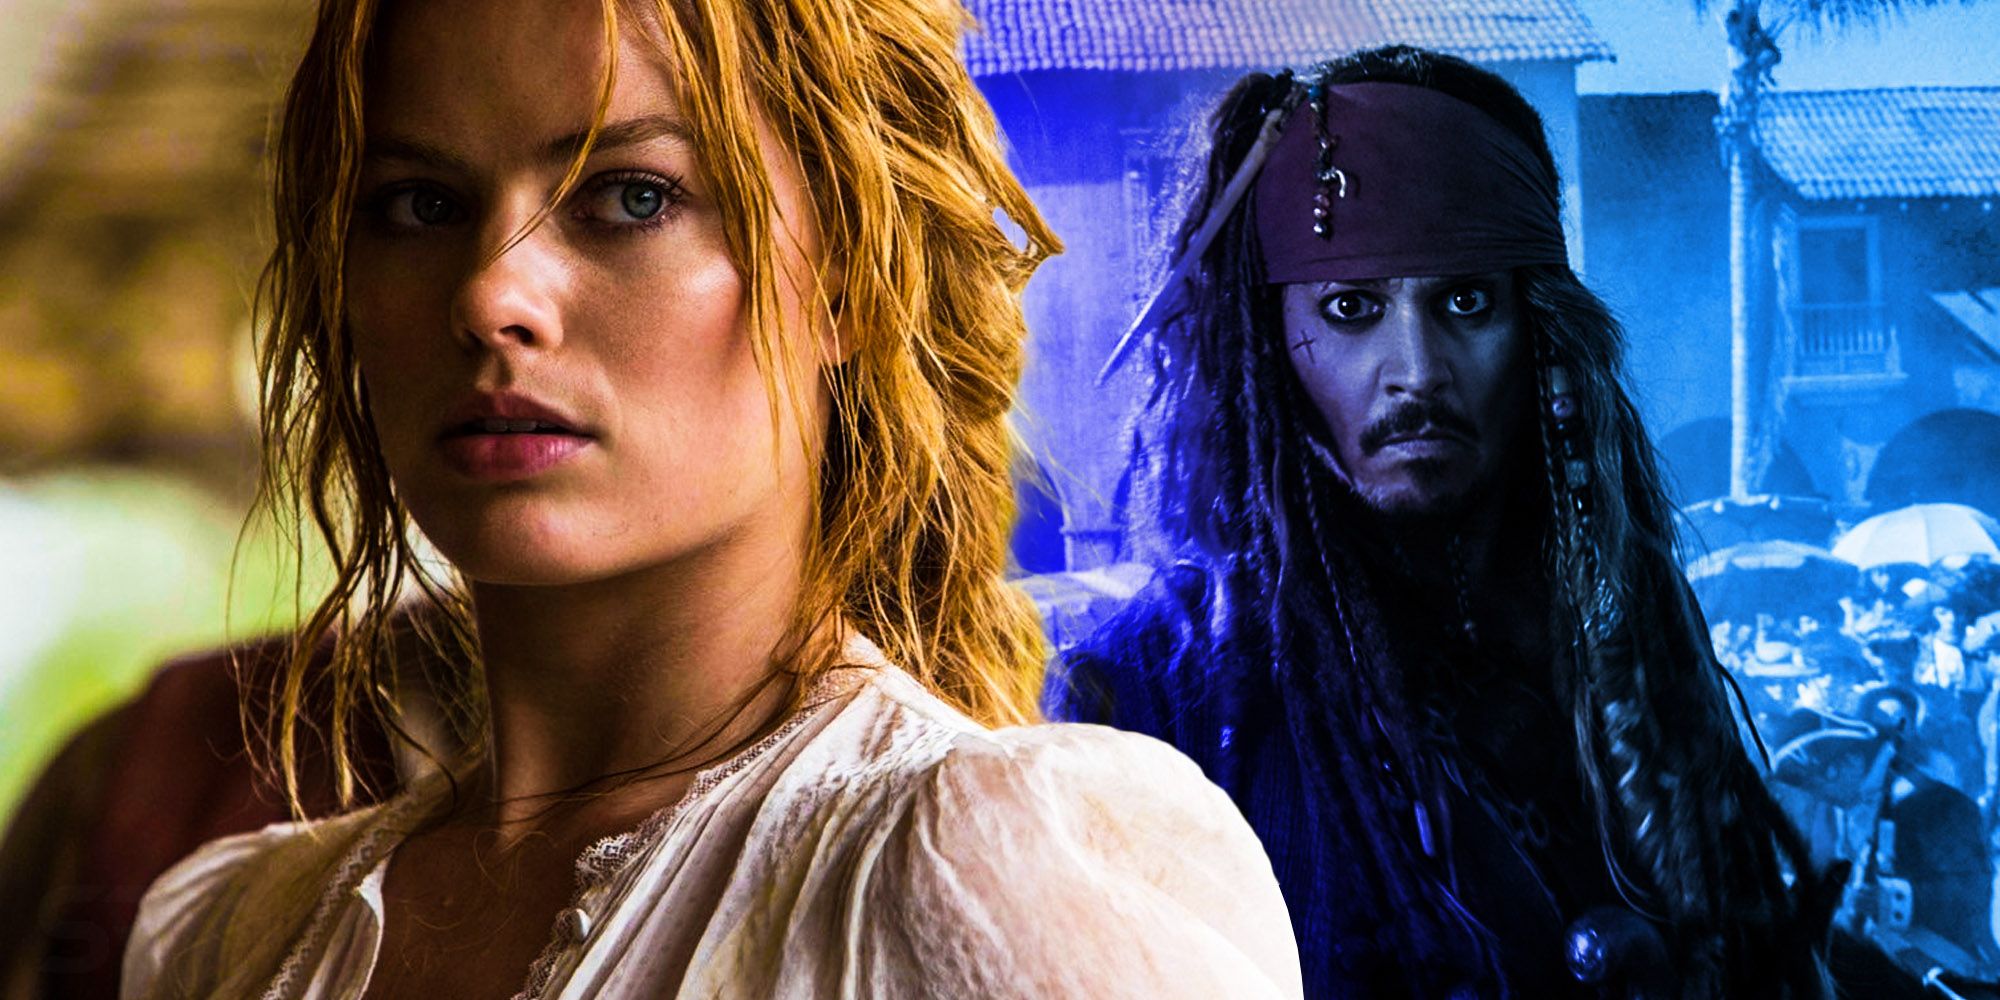 Margot Robbie Pirates of the caribbean queer character Jack sparrow